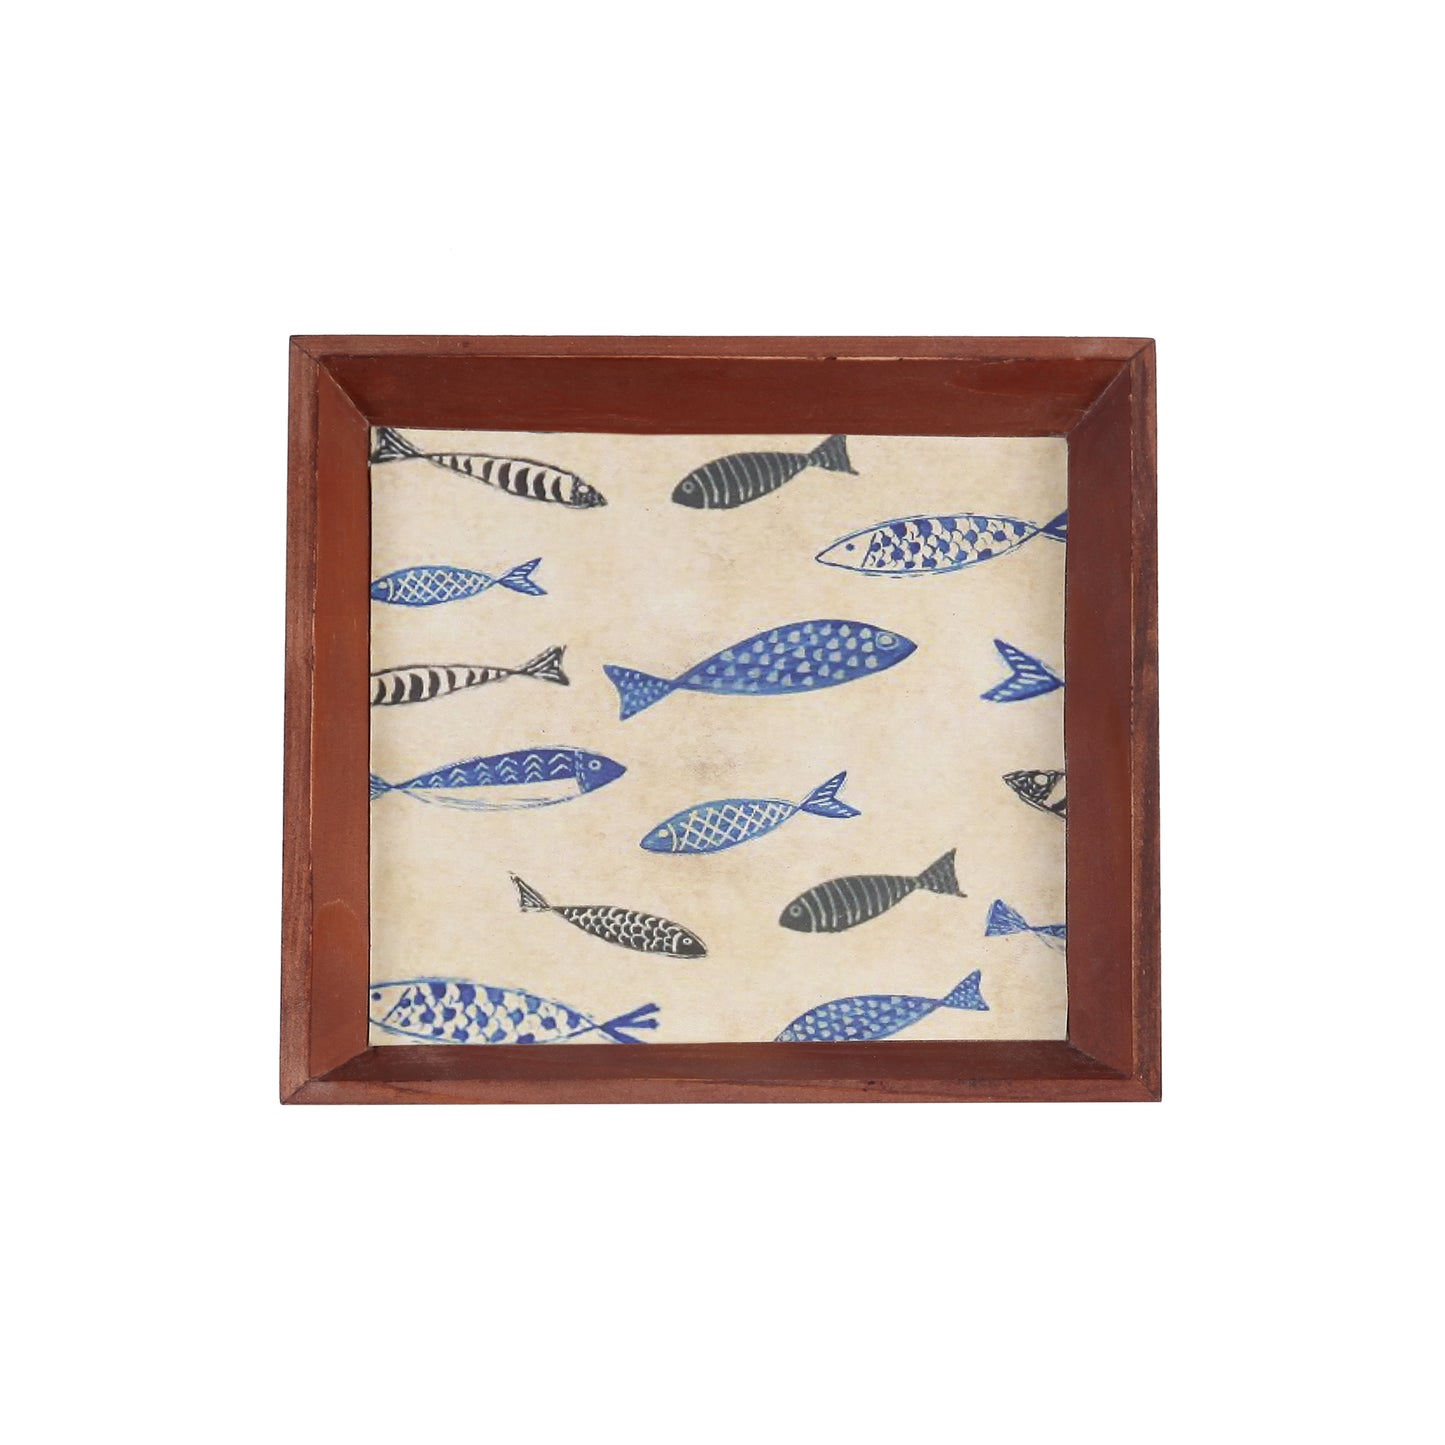 A Tiny Mistake Fish Small Square Wooden Serving Tray, 18 x 18 x 2 cm